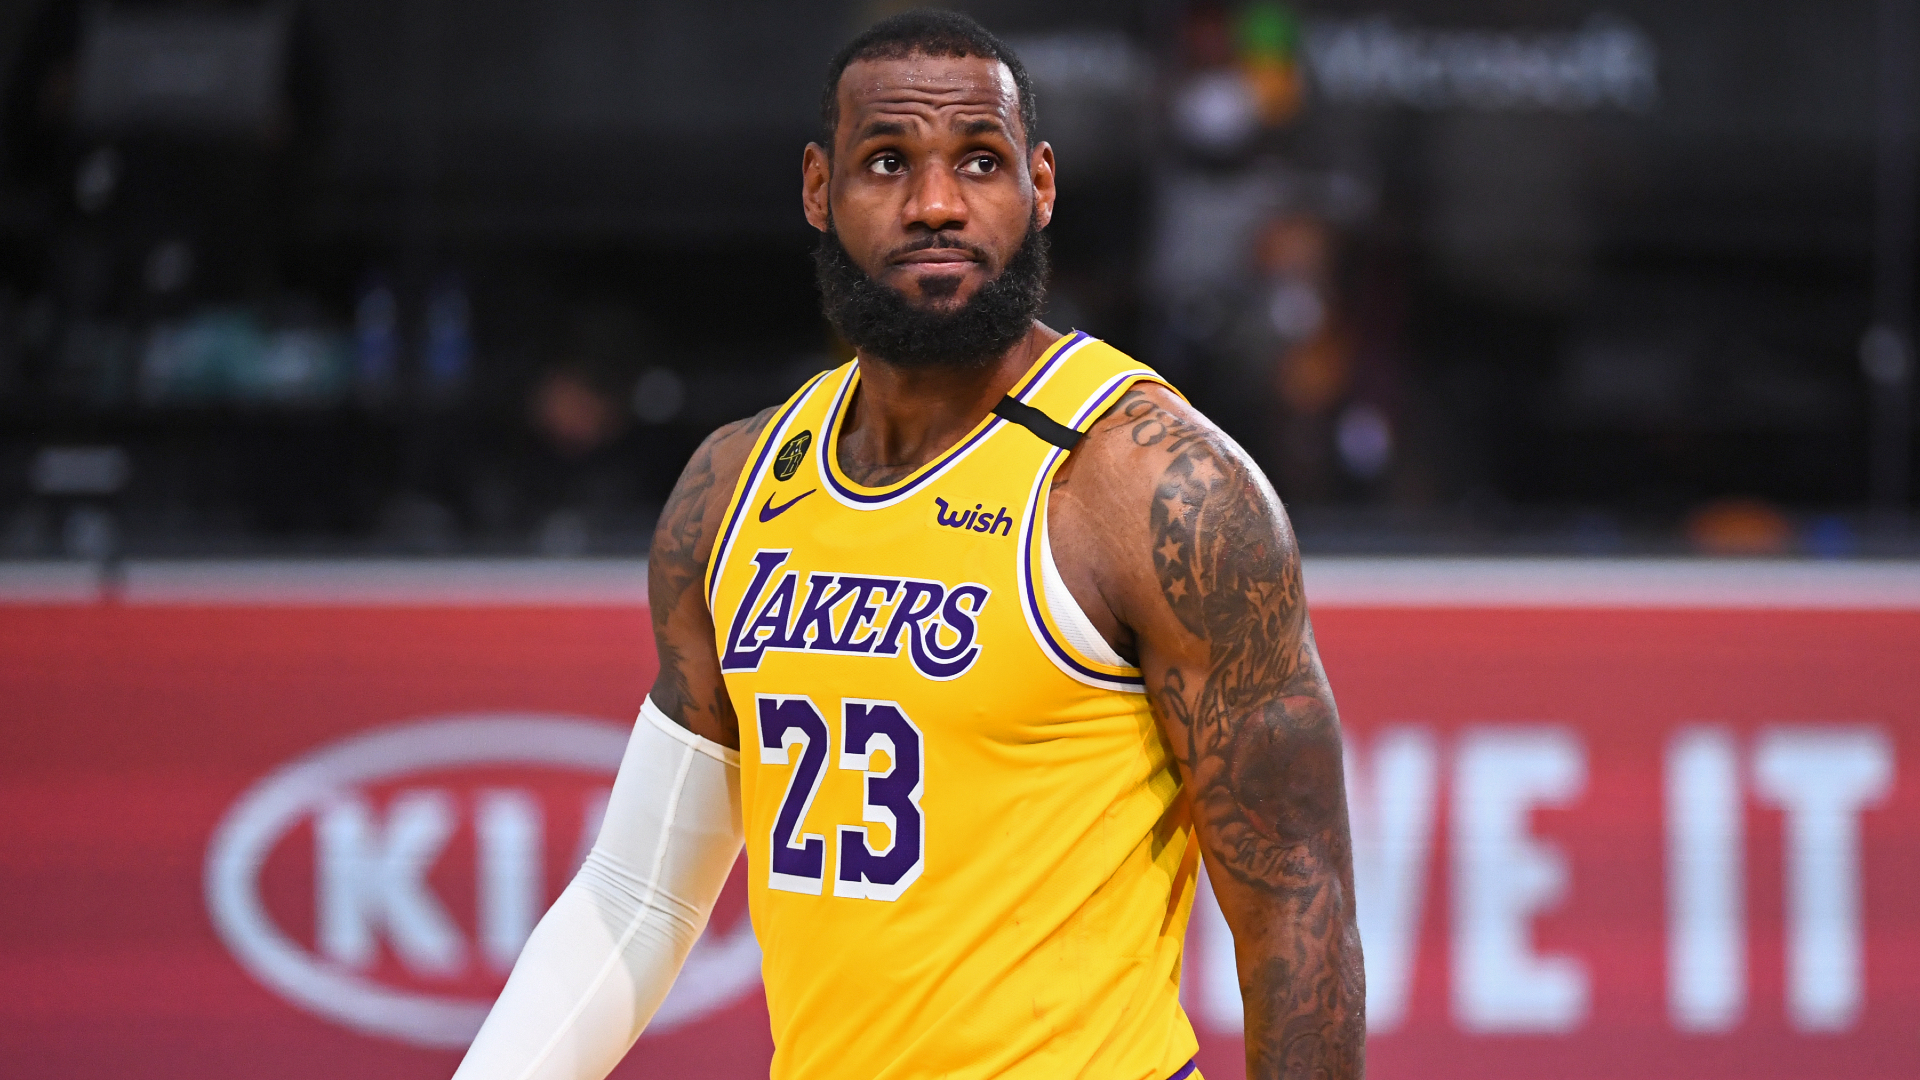 Lakers Playing Clippers Opening Night Of 2020-21 NBA Season